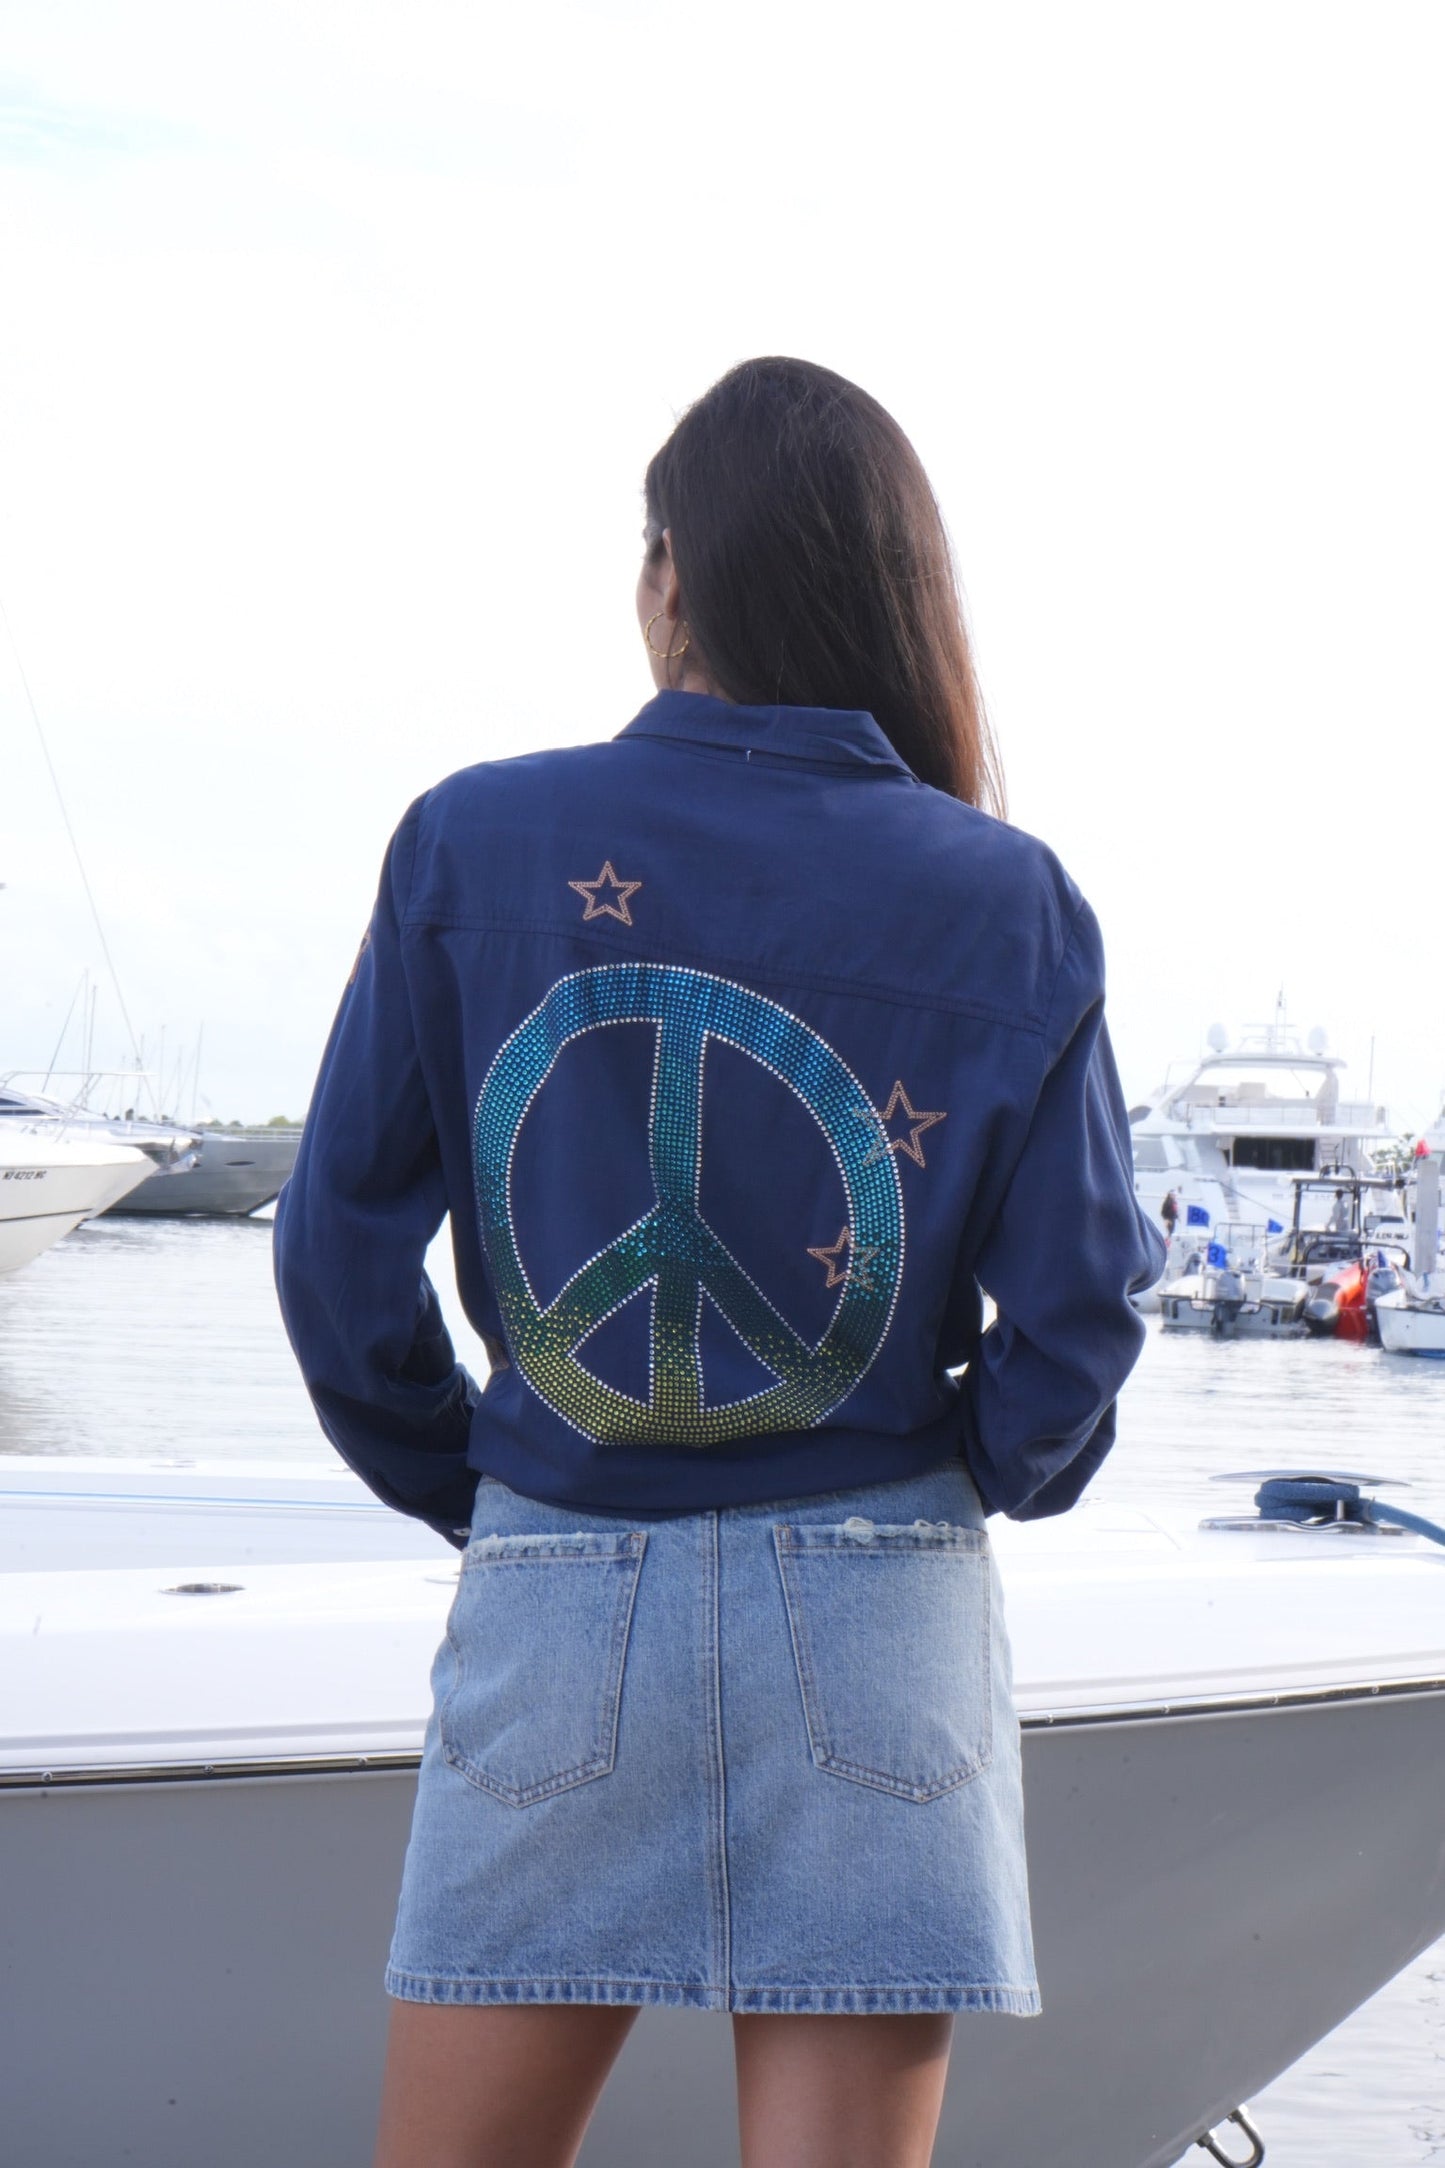 Shirt, Embroidered Star Navy, Blue/Green Peace Sign